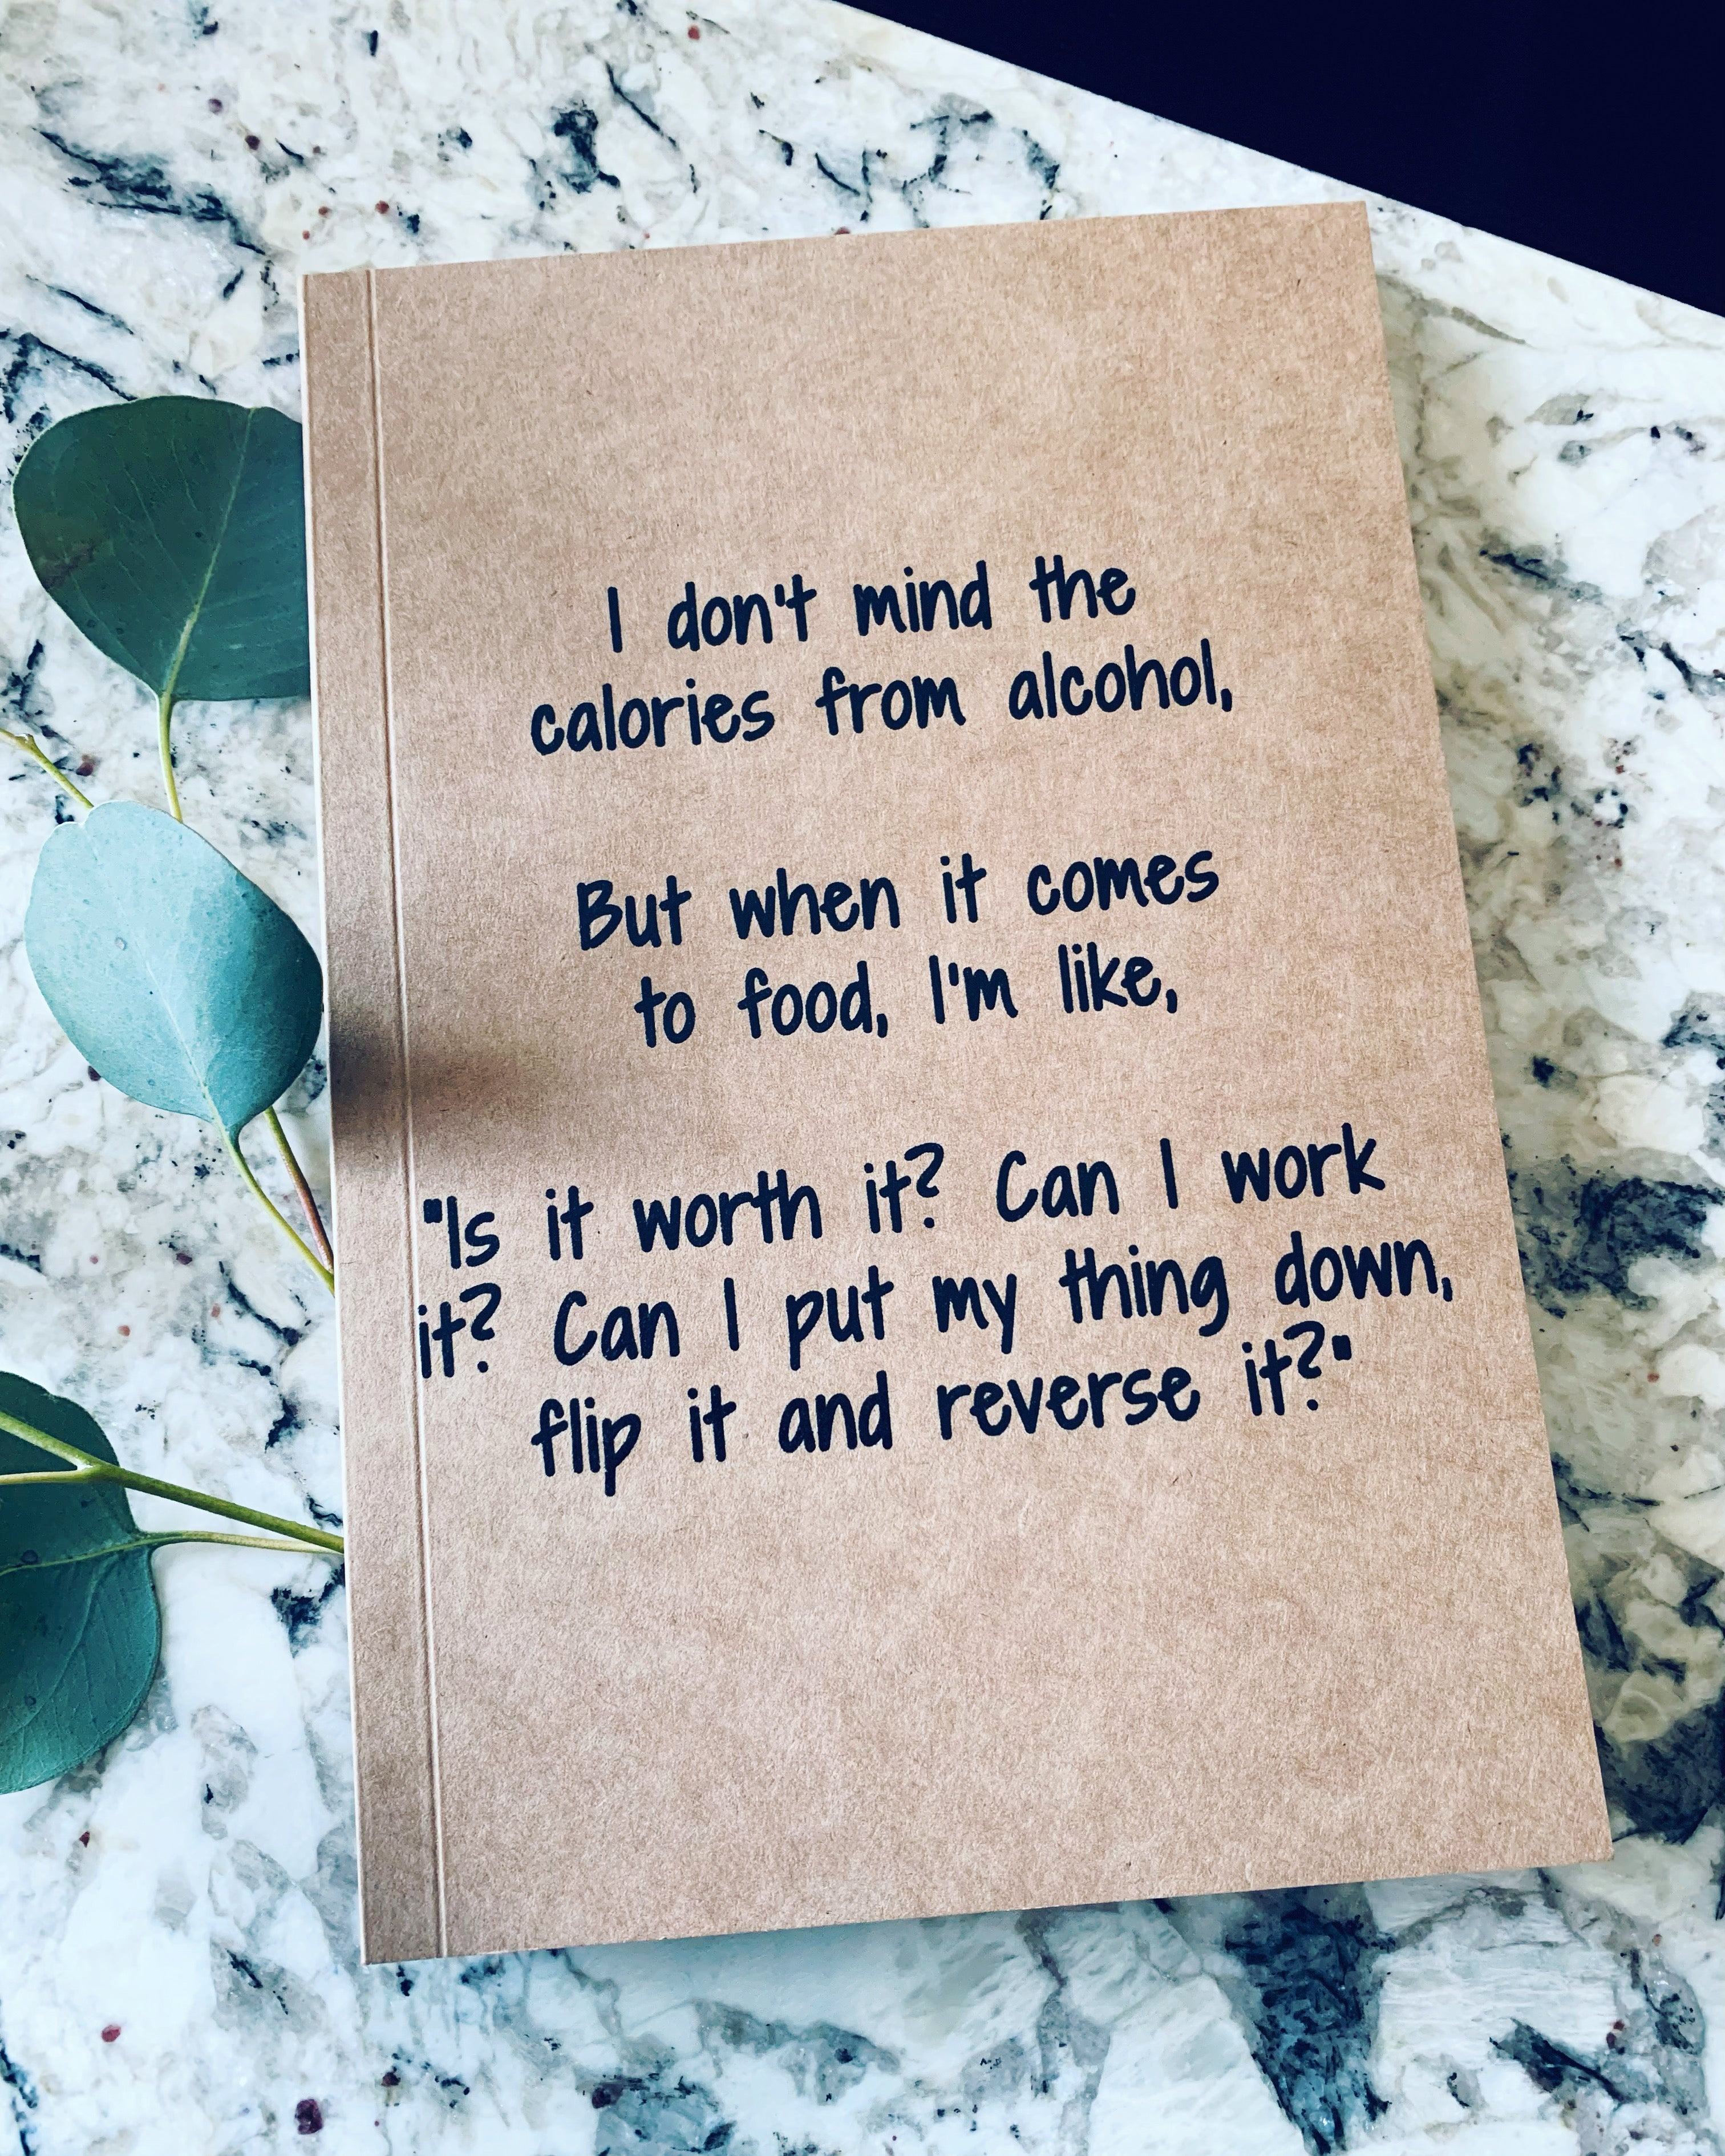 I don’t minds the calories from alcohol, but when it comes to food I'm like, "is it worth it? Can I work it? Can I put my thing down flip it and reverse it?" kraft notebook